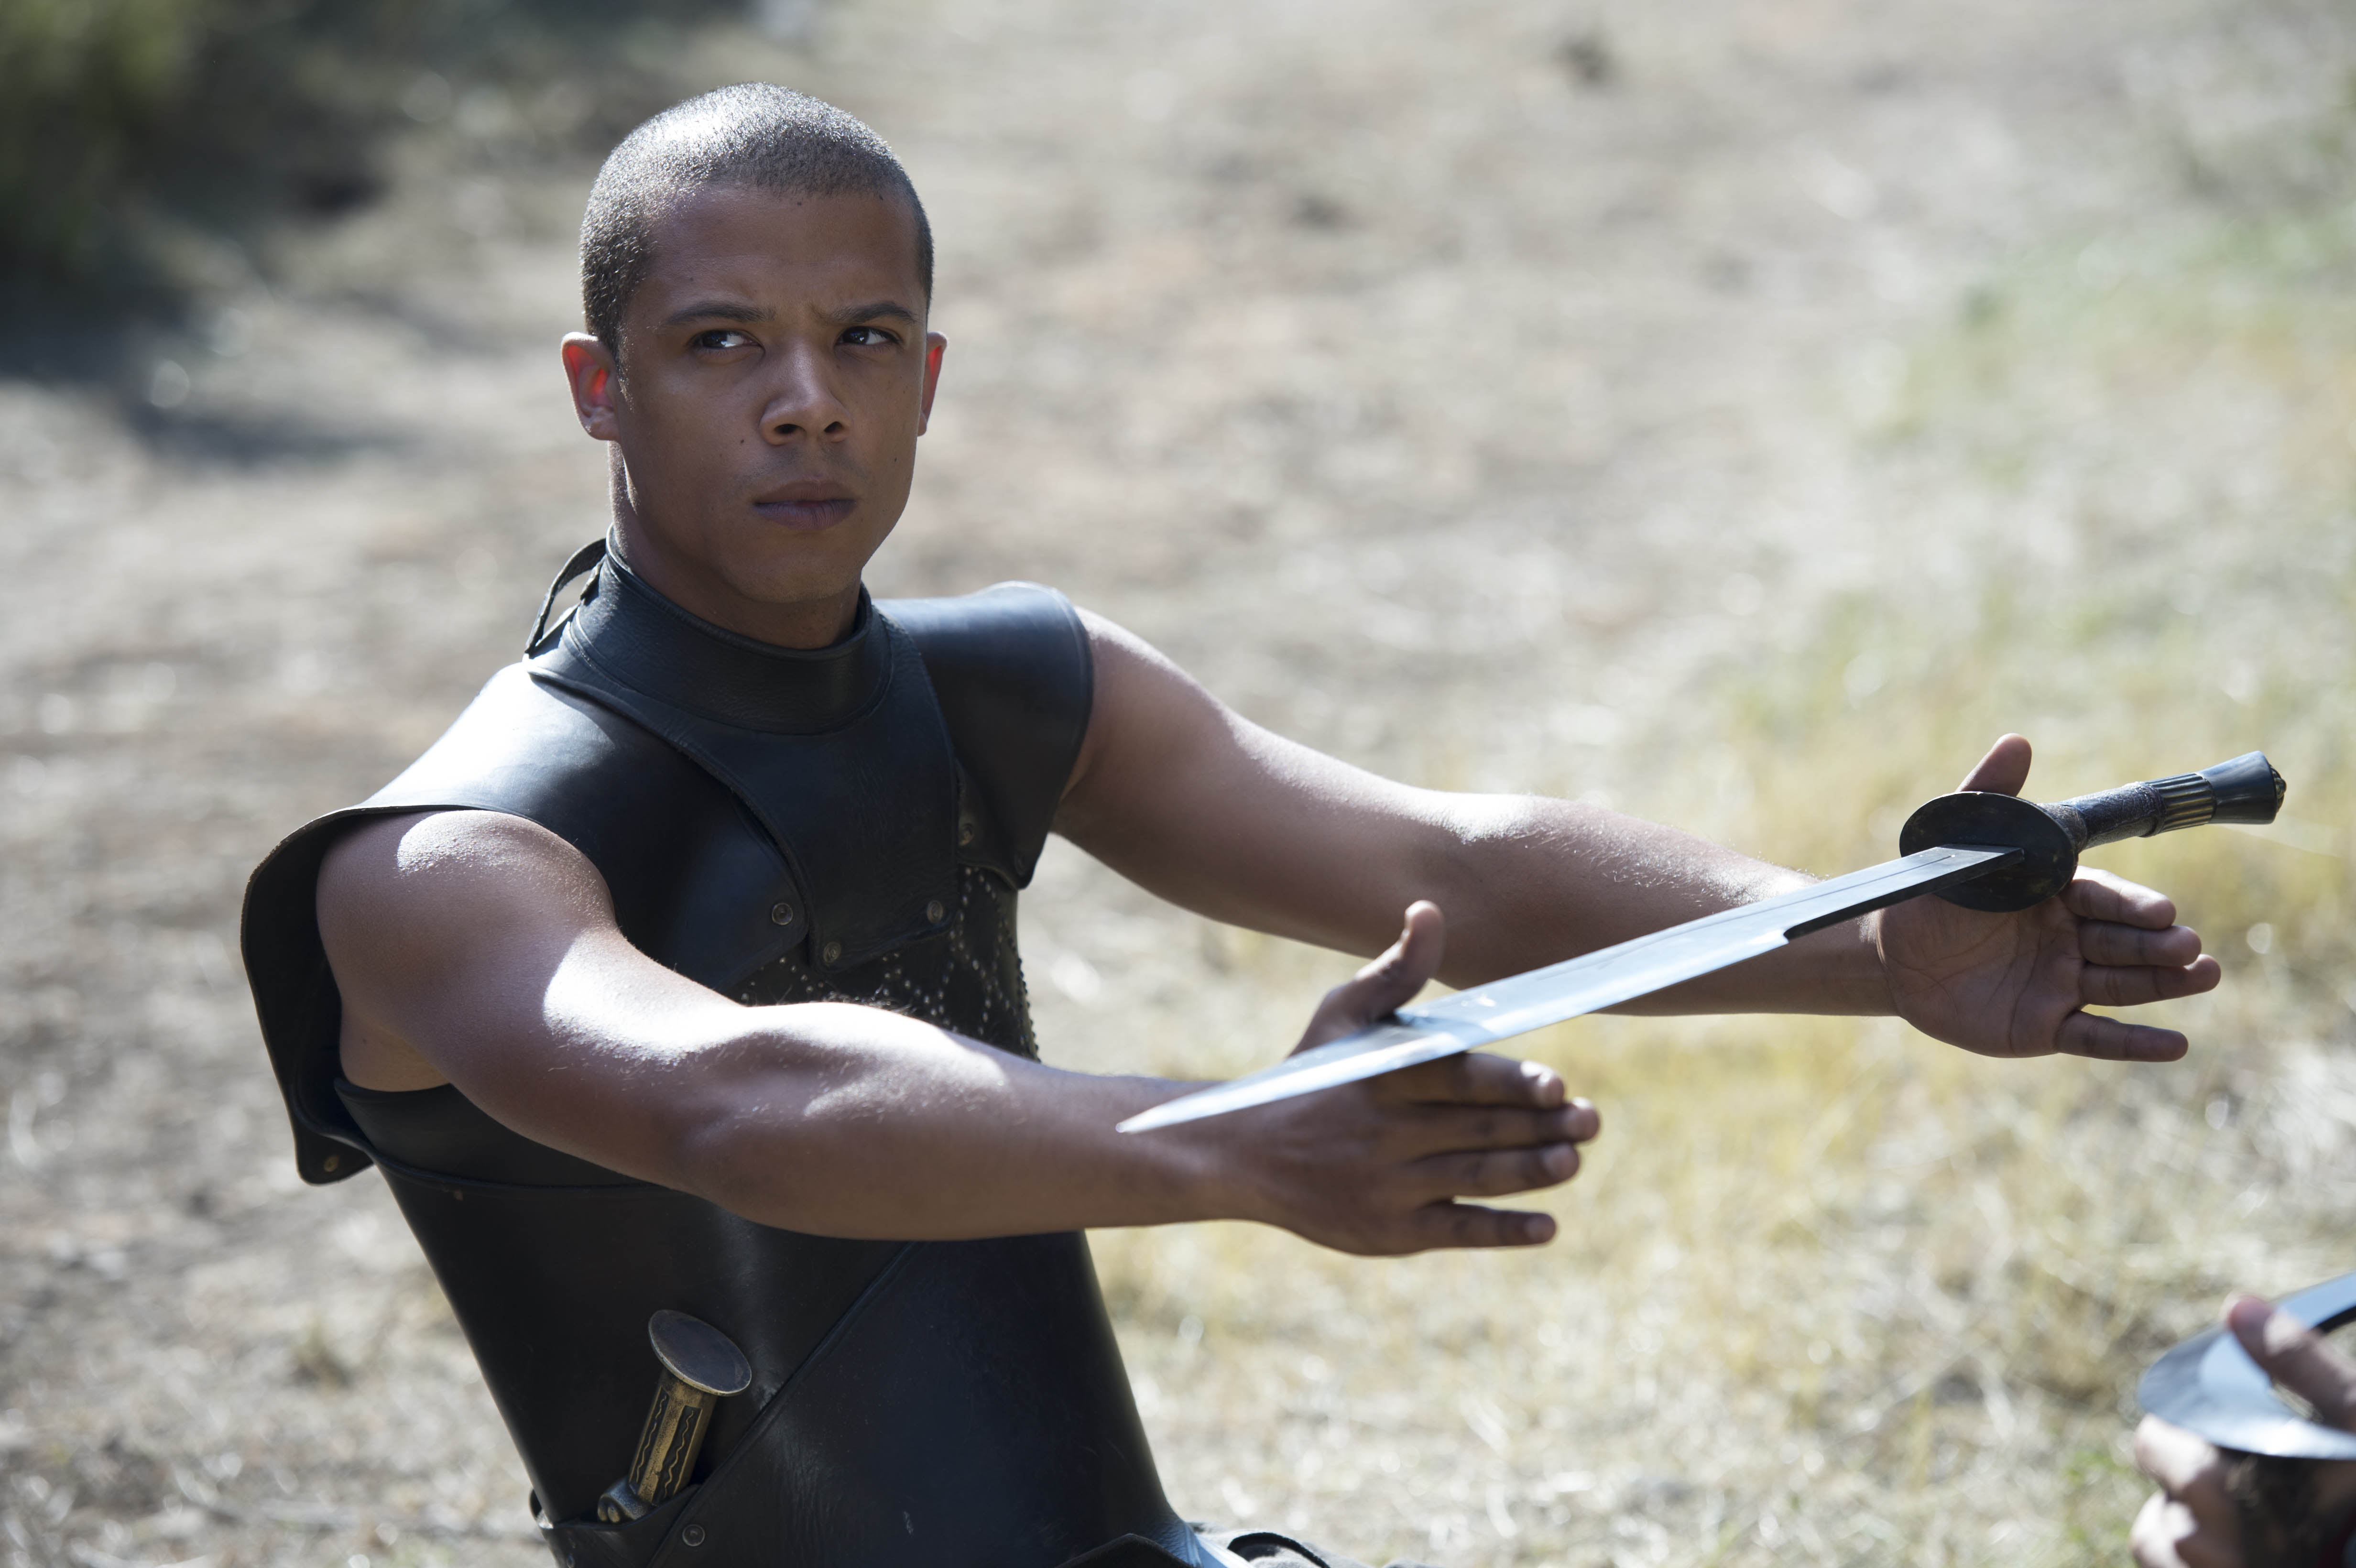 Music career comes first for Game Of Thrones star Jacob Anderson aka Raleigh Ritchie | London 